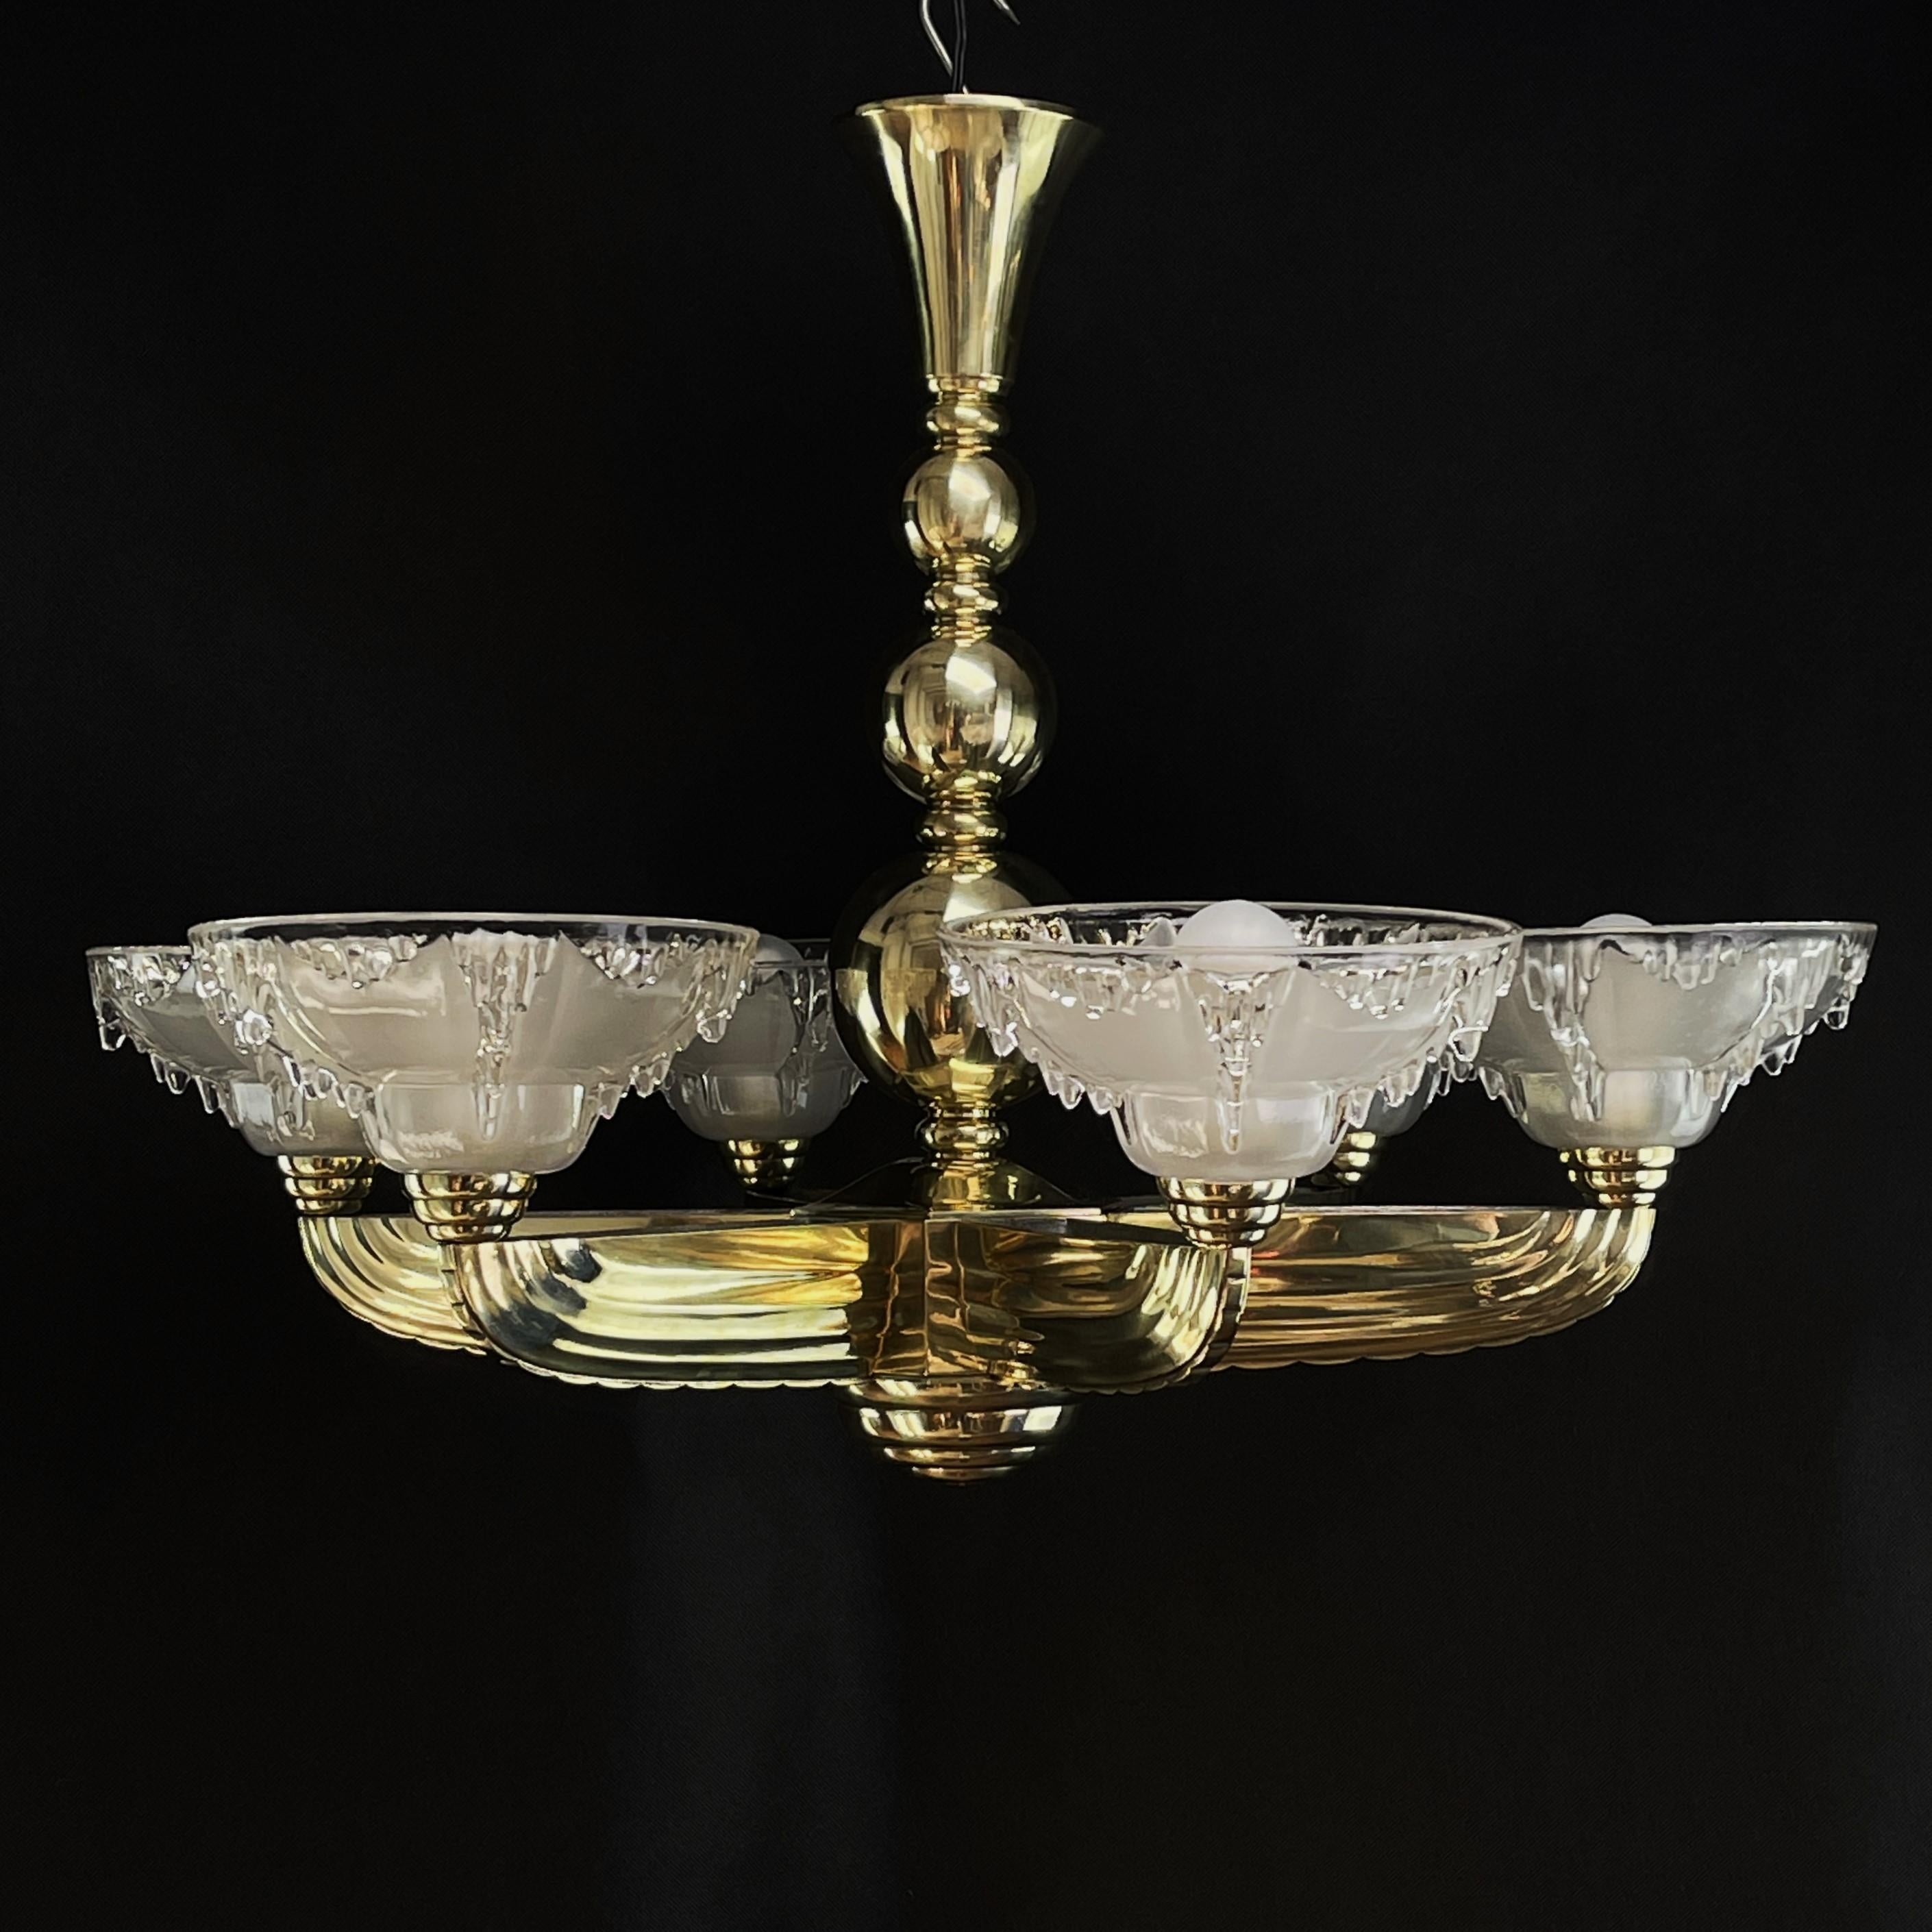 Glass Art Deco Ceiling Lamp from Petitot & Ezan, 1930s For Sale